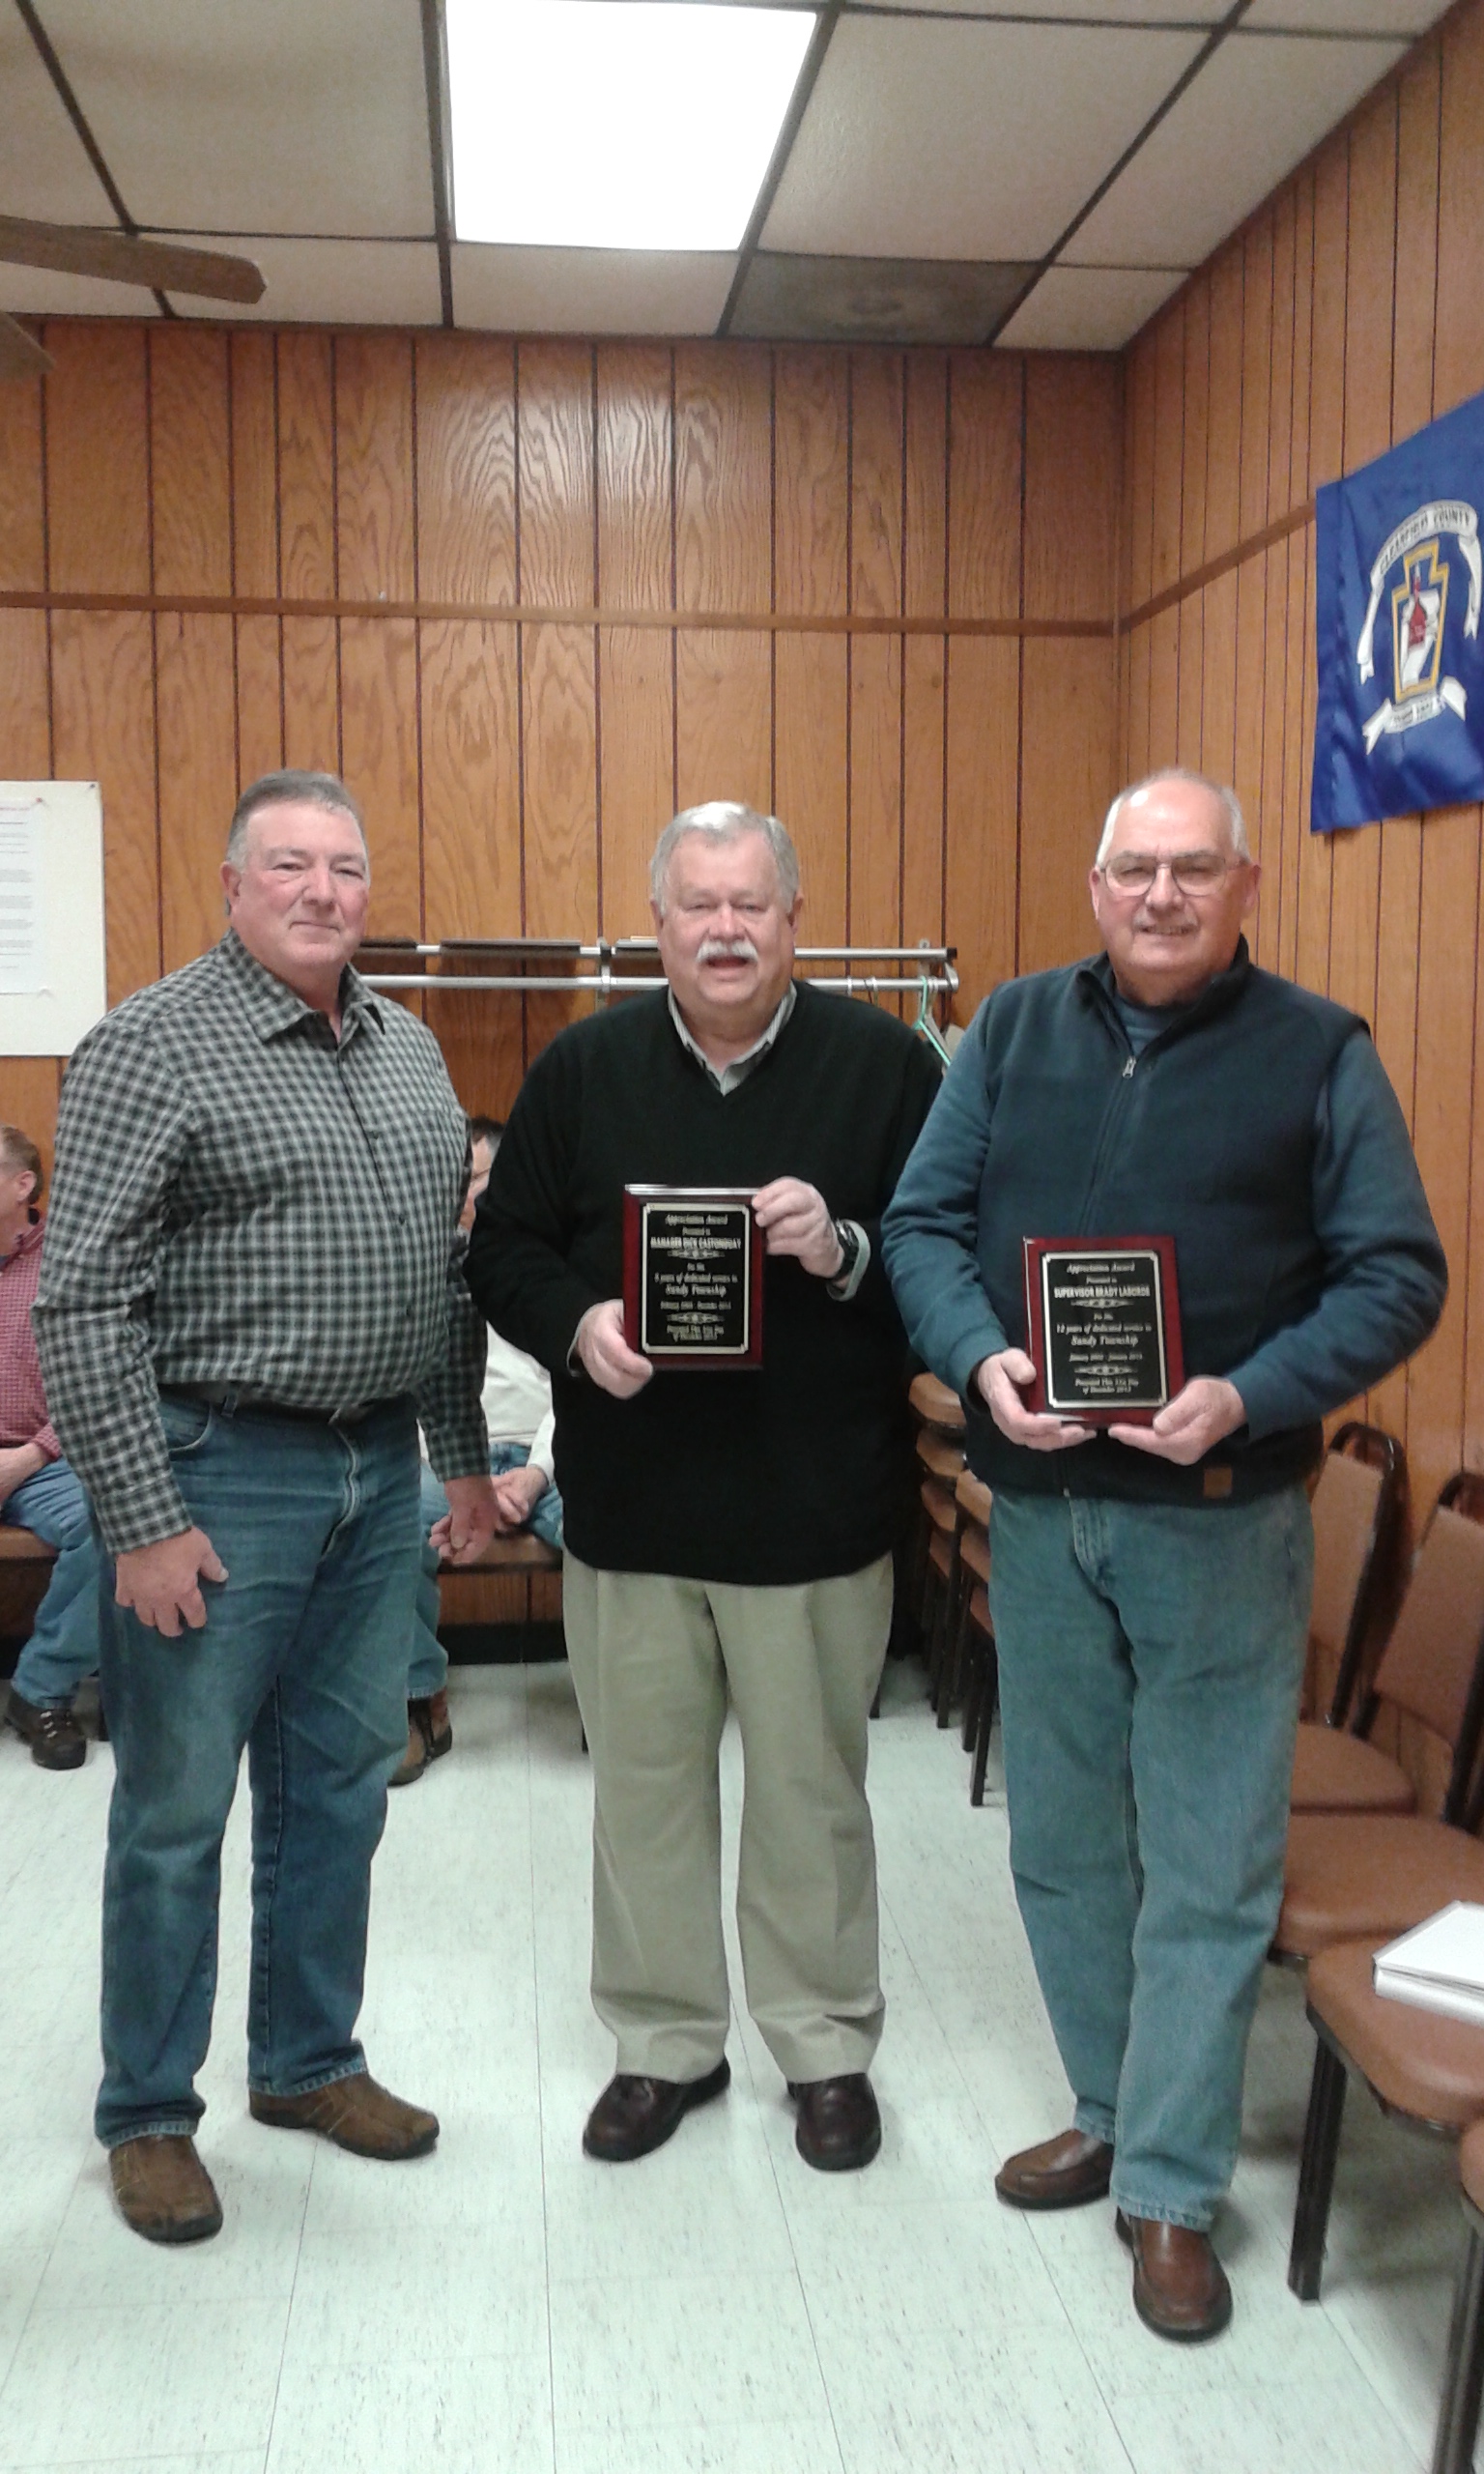 Sandy Township officials presented awards to former Manager Dick Castonguay and former Supervisor Brady LaBorde.  (Photo by Alex Toledo)